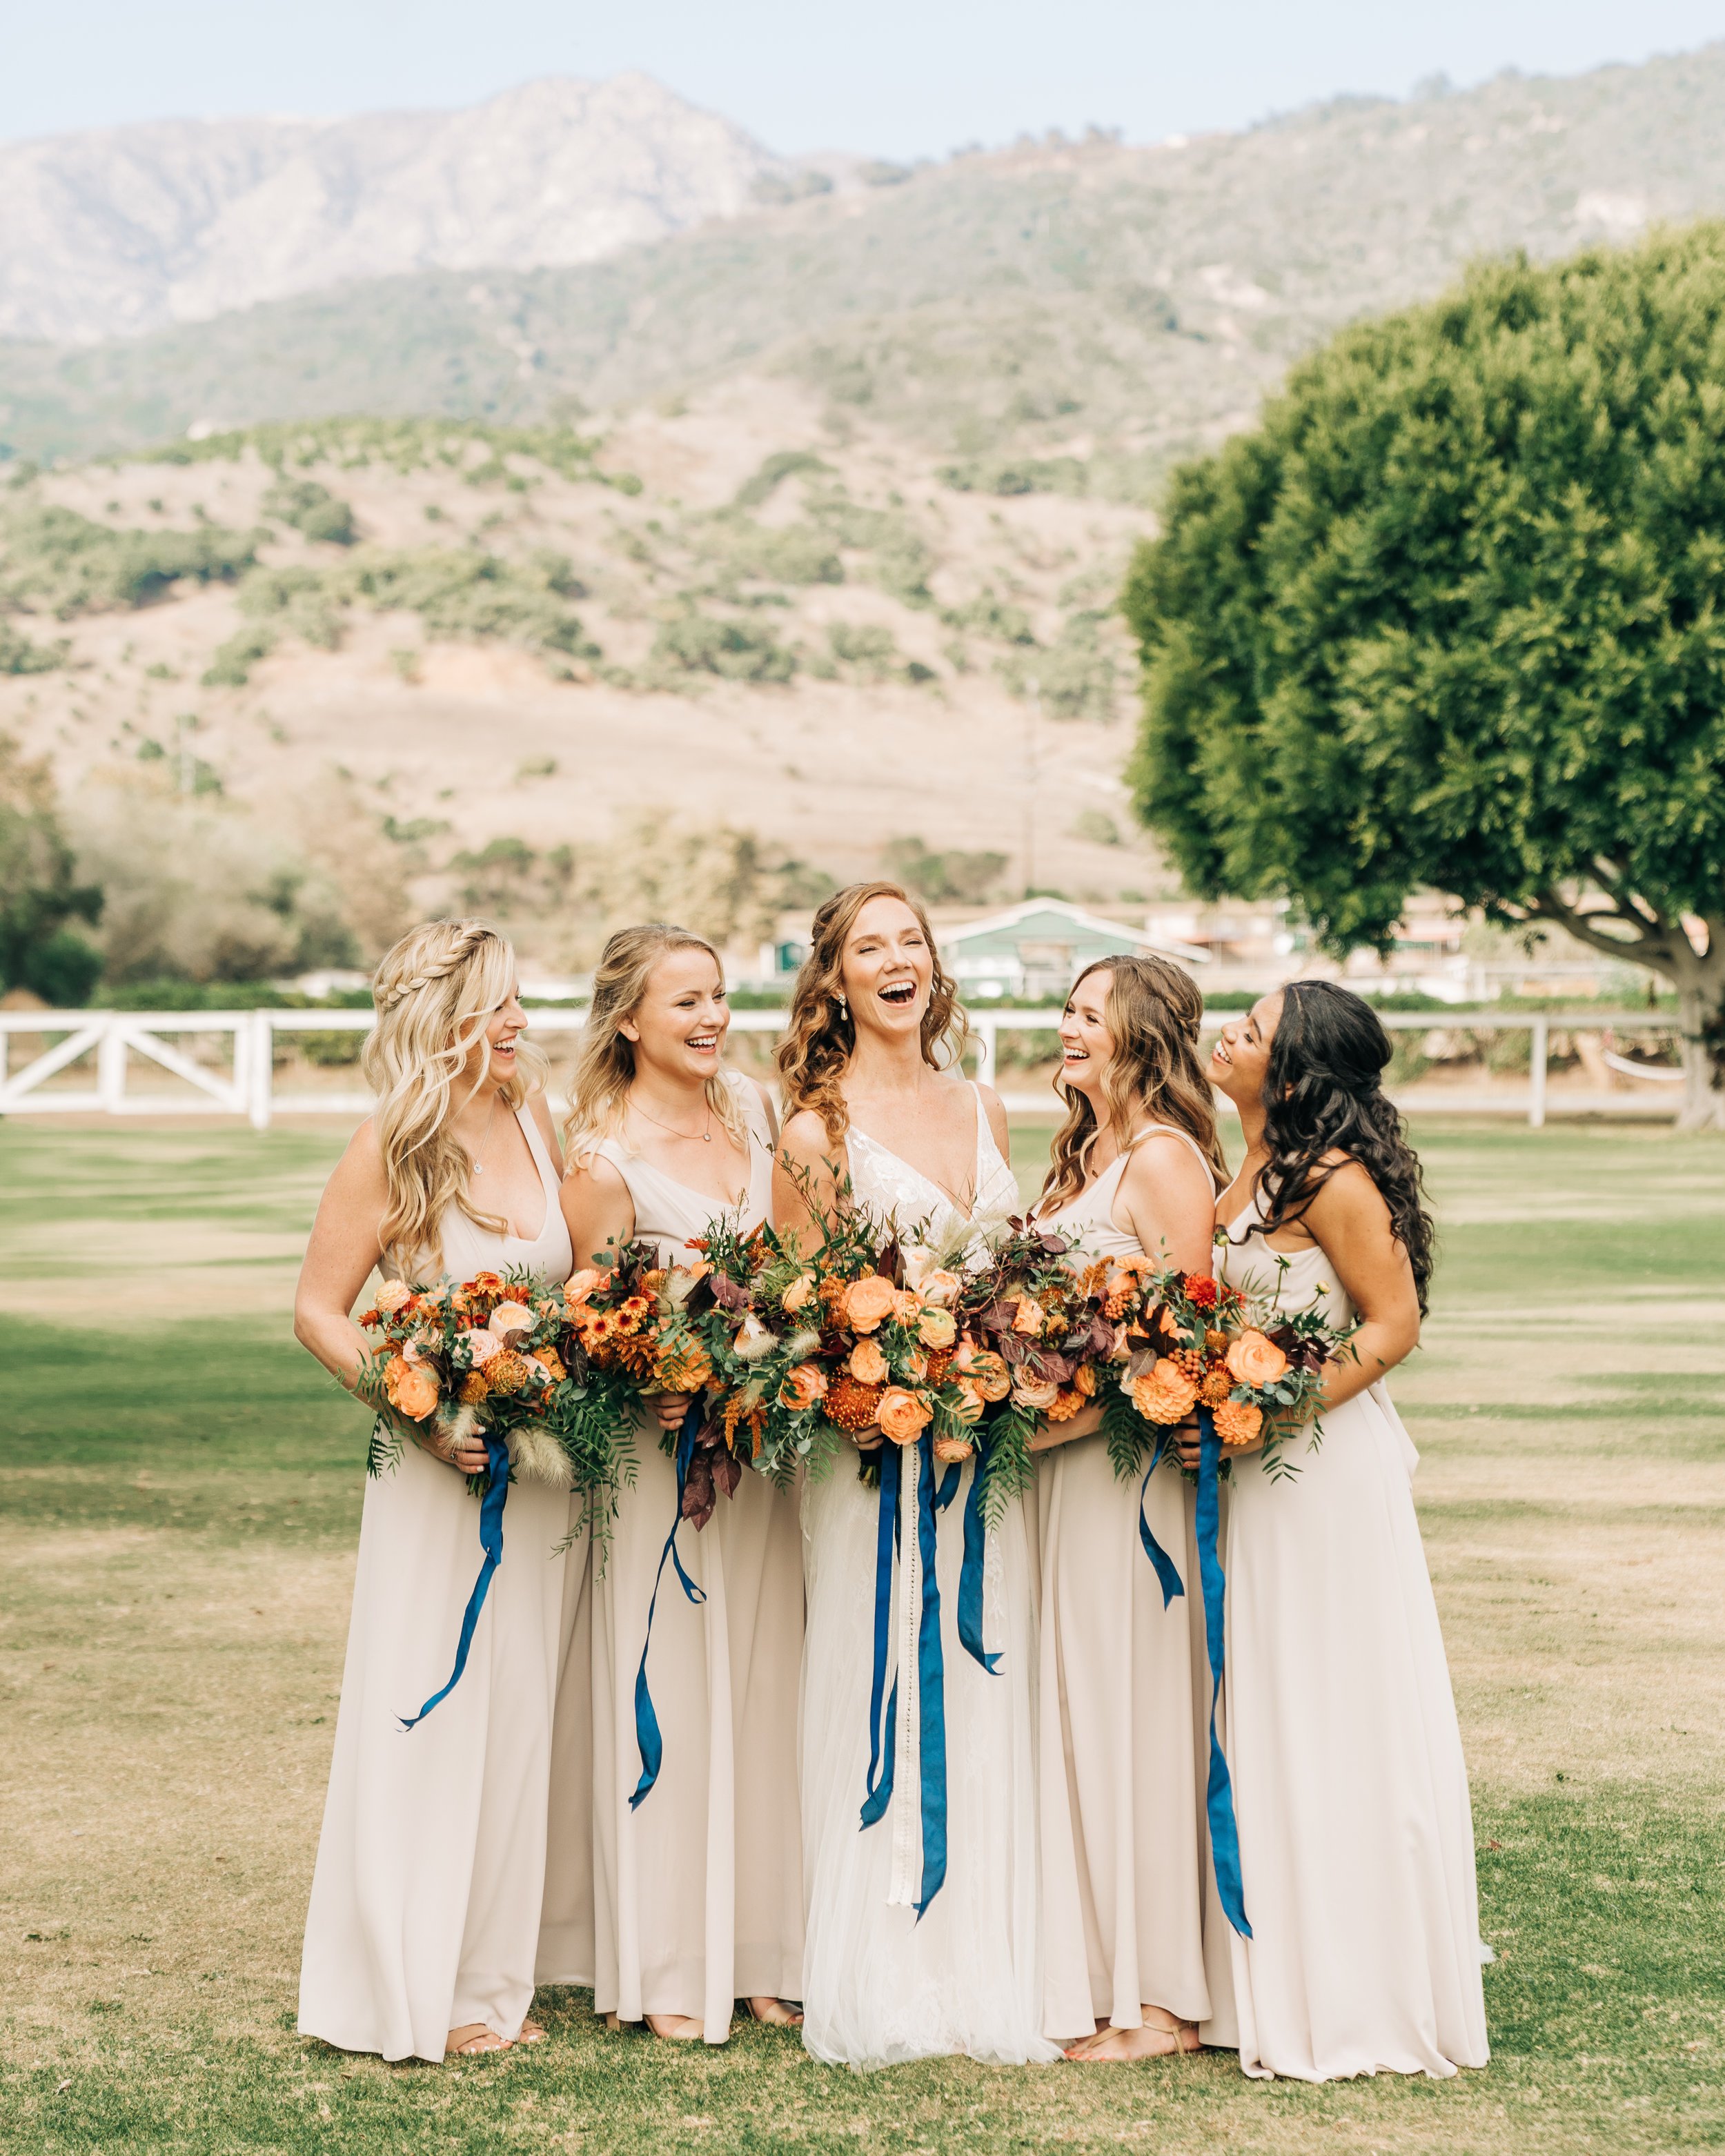 www.santabarbarawedding.com | Brandon Bibbins Photography | The Cottages at Polo Run | Christina Welch Floral | Bride Laughs with Bridesmaids